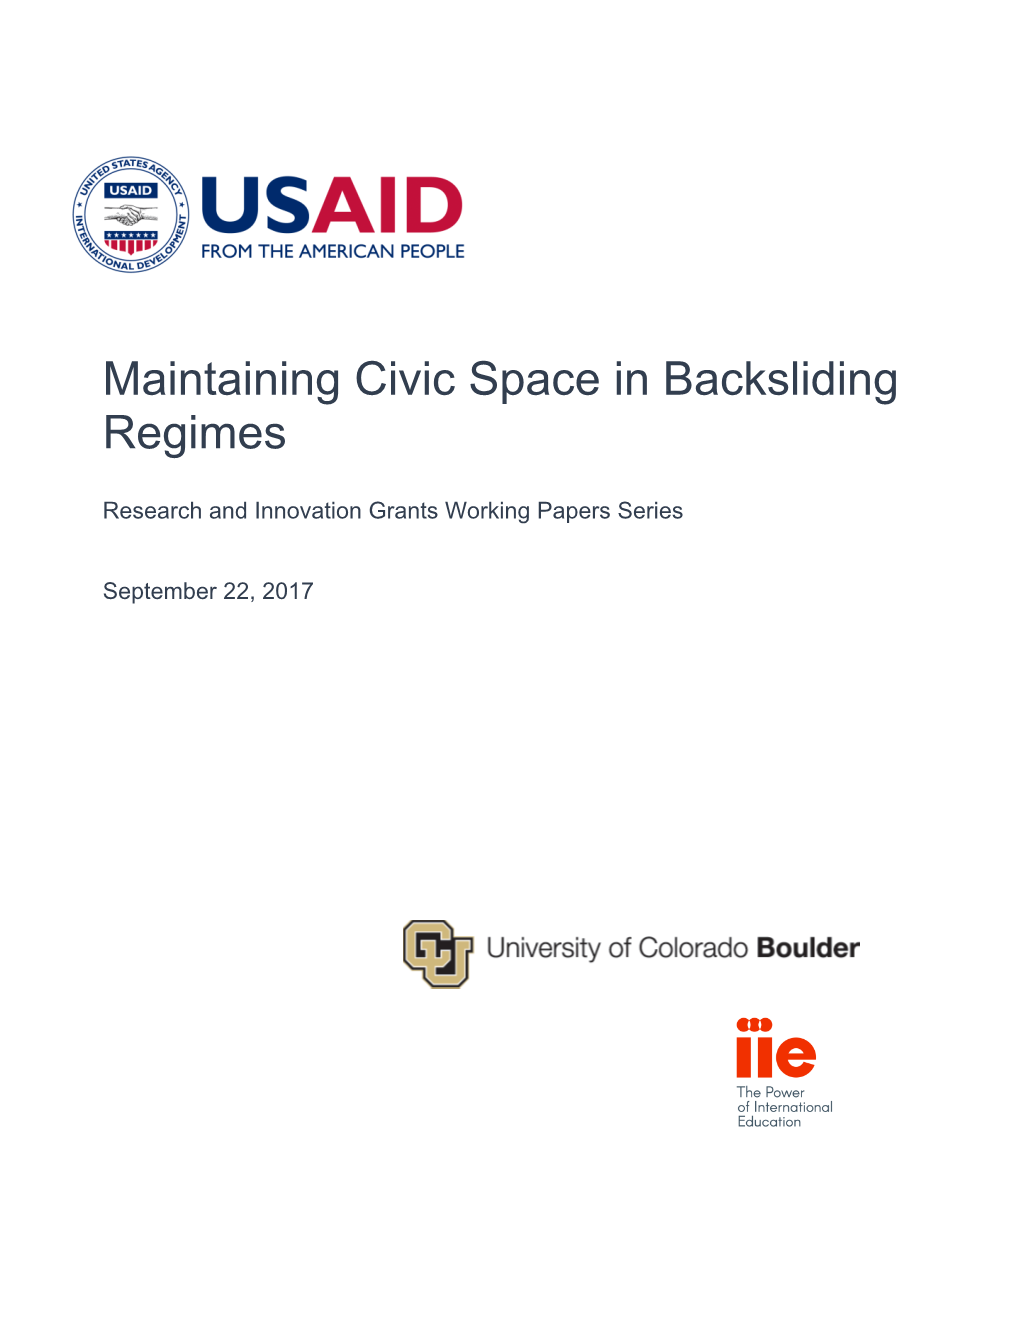 Maintaining Civic Space in Backsliding Regimes